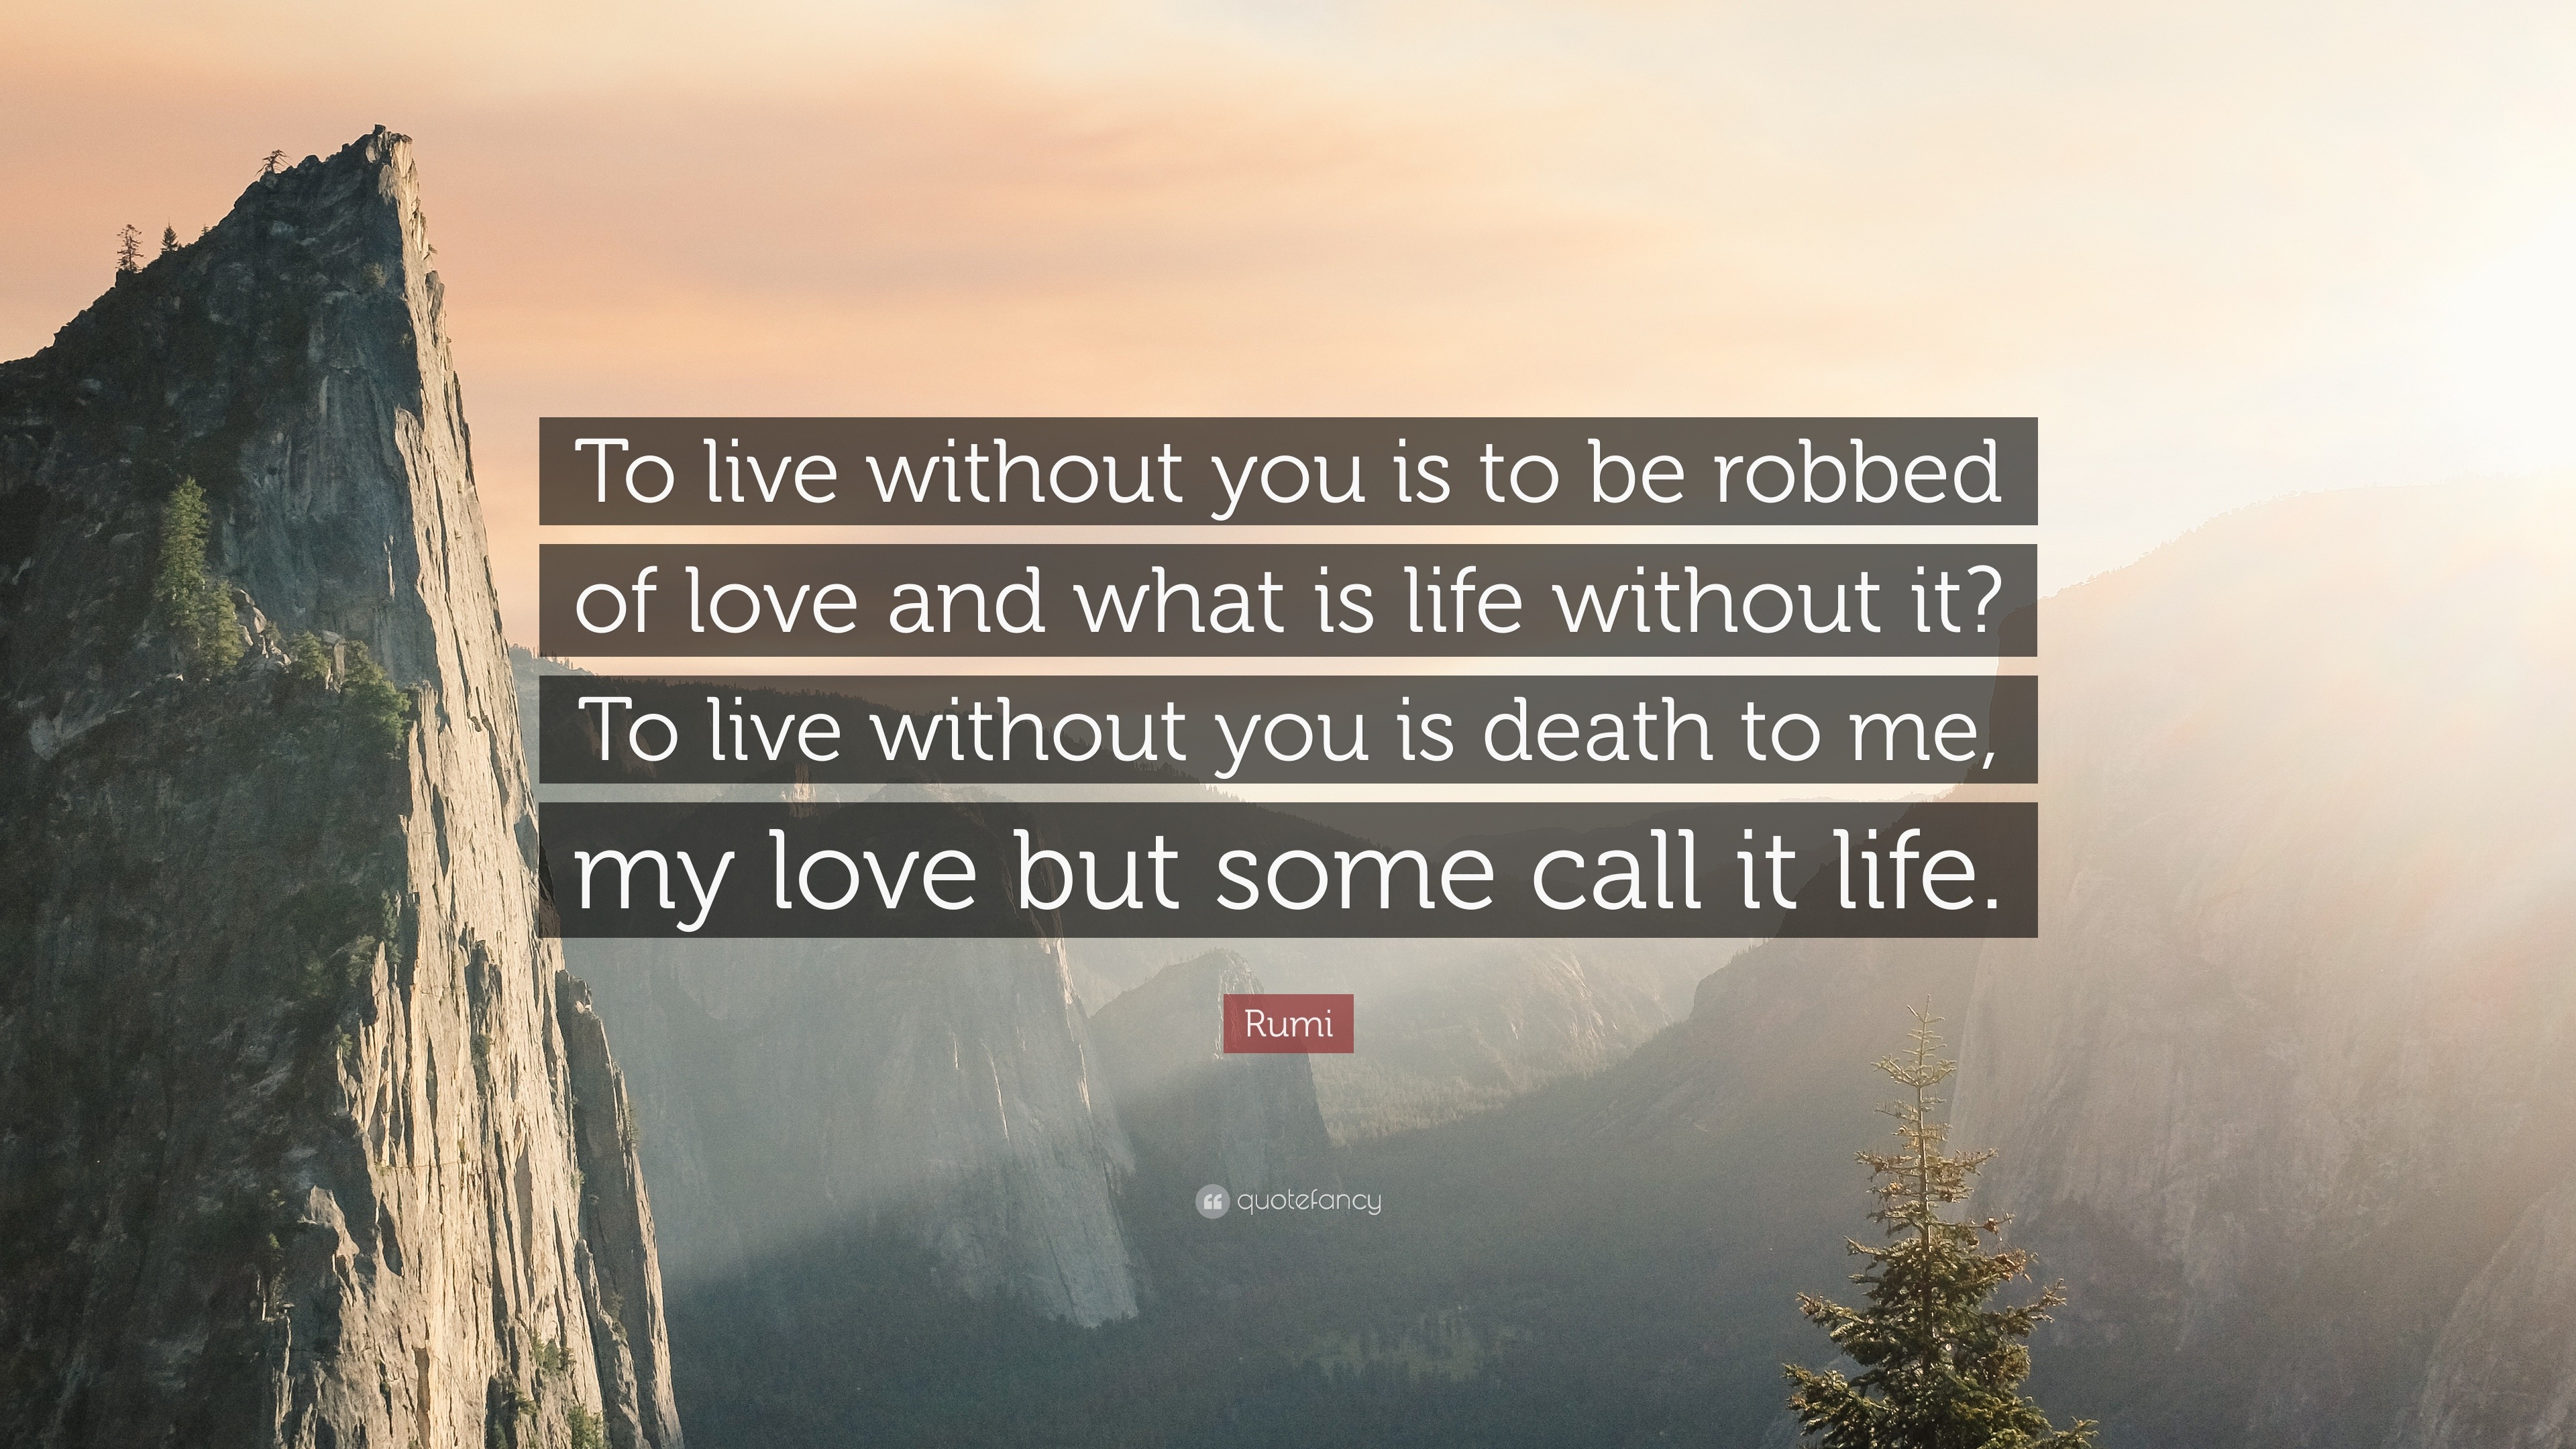 Rumi Quote “To live without you is to be robbed of love and what